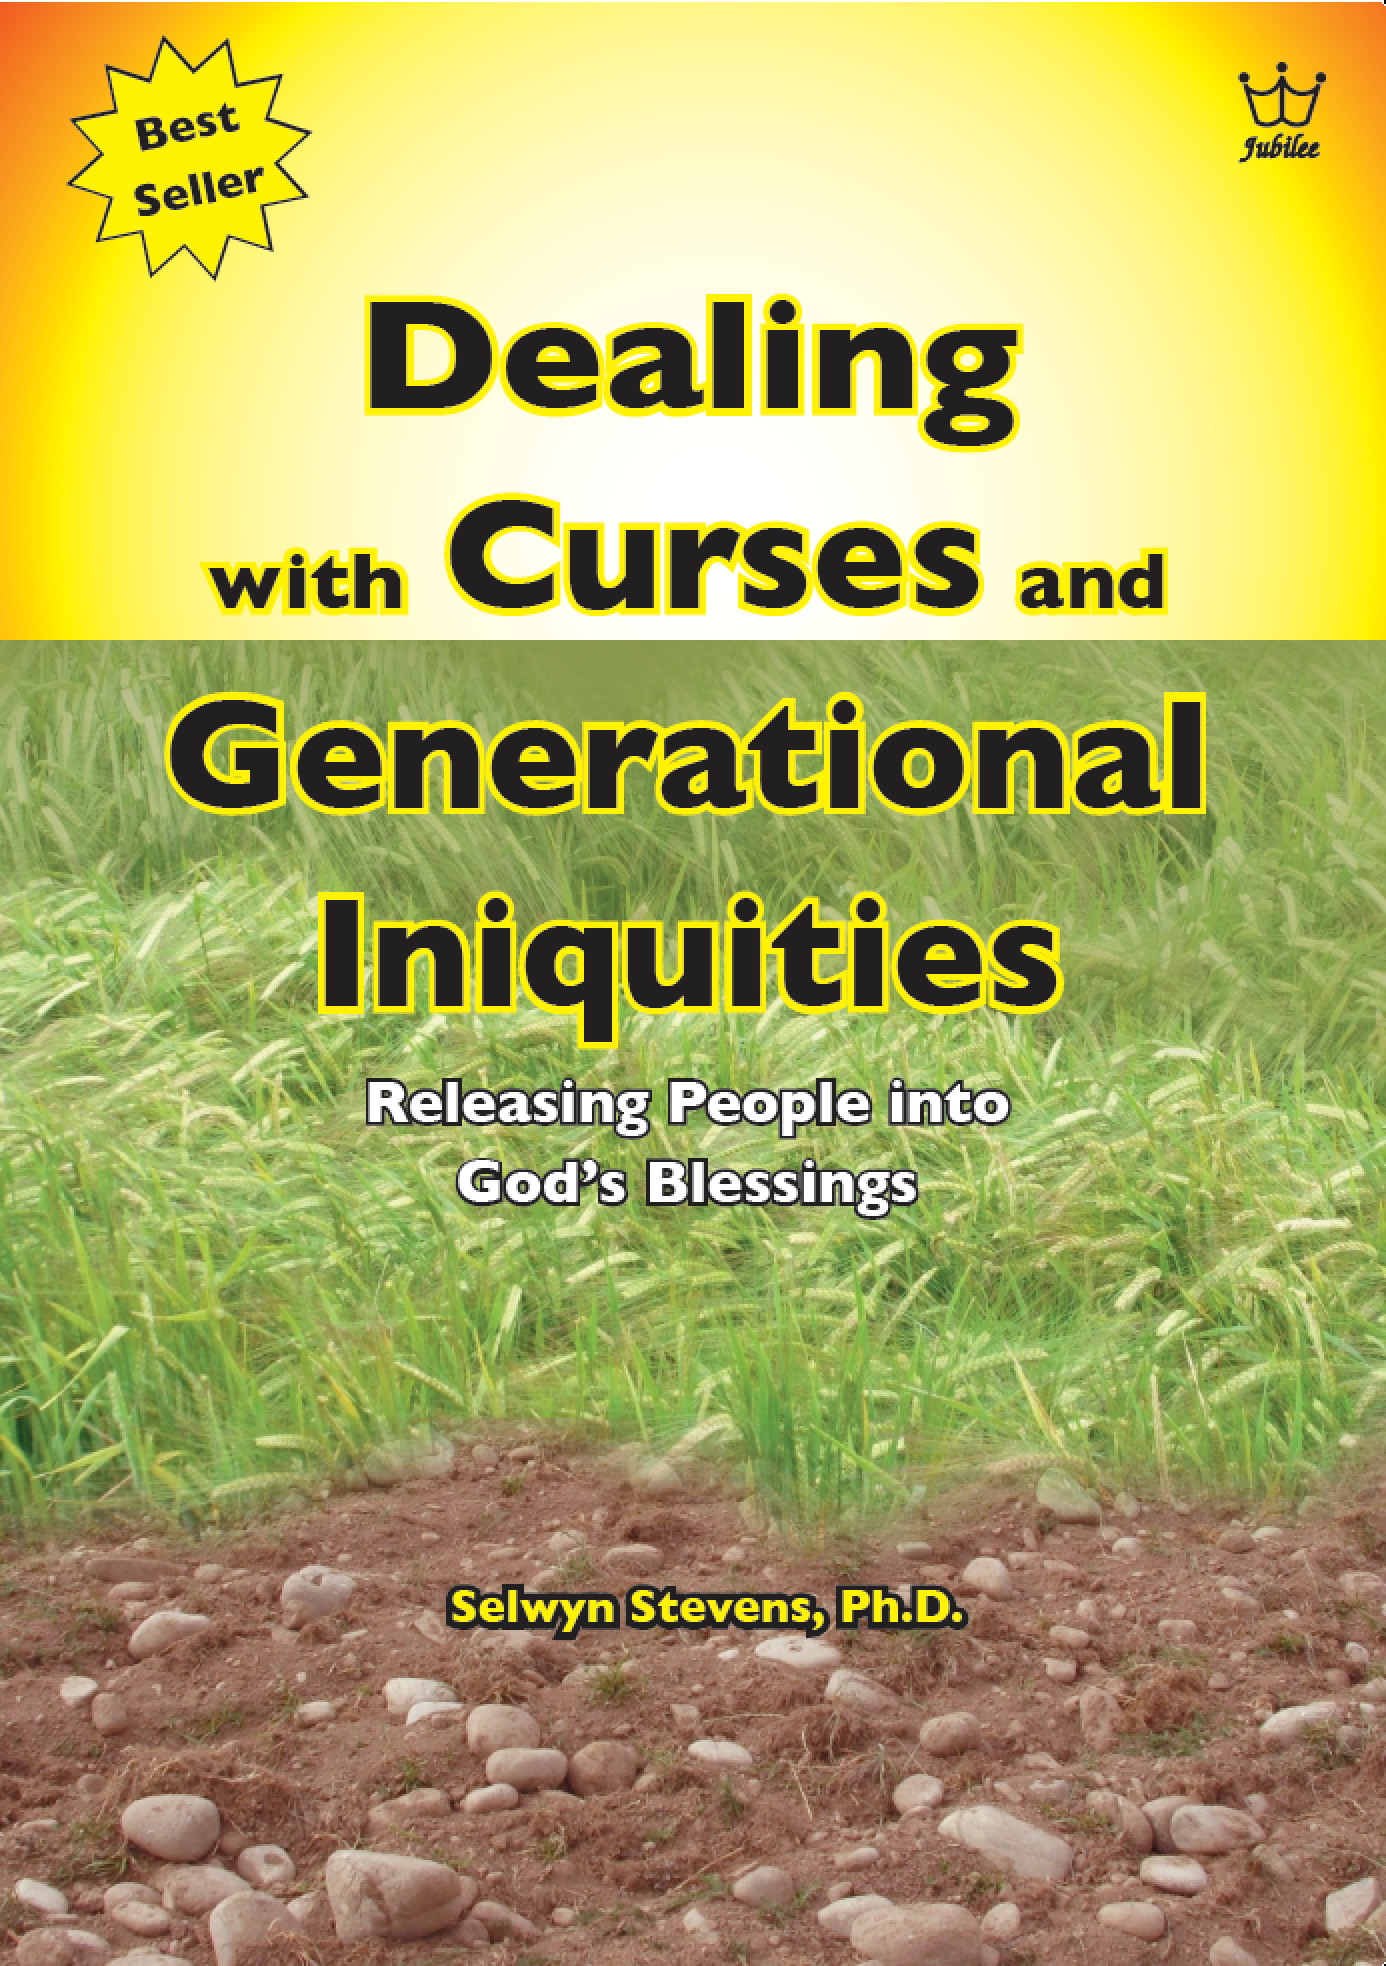 Dealing with Curses & Generational Iniquities: MP4 Video on USB